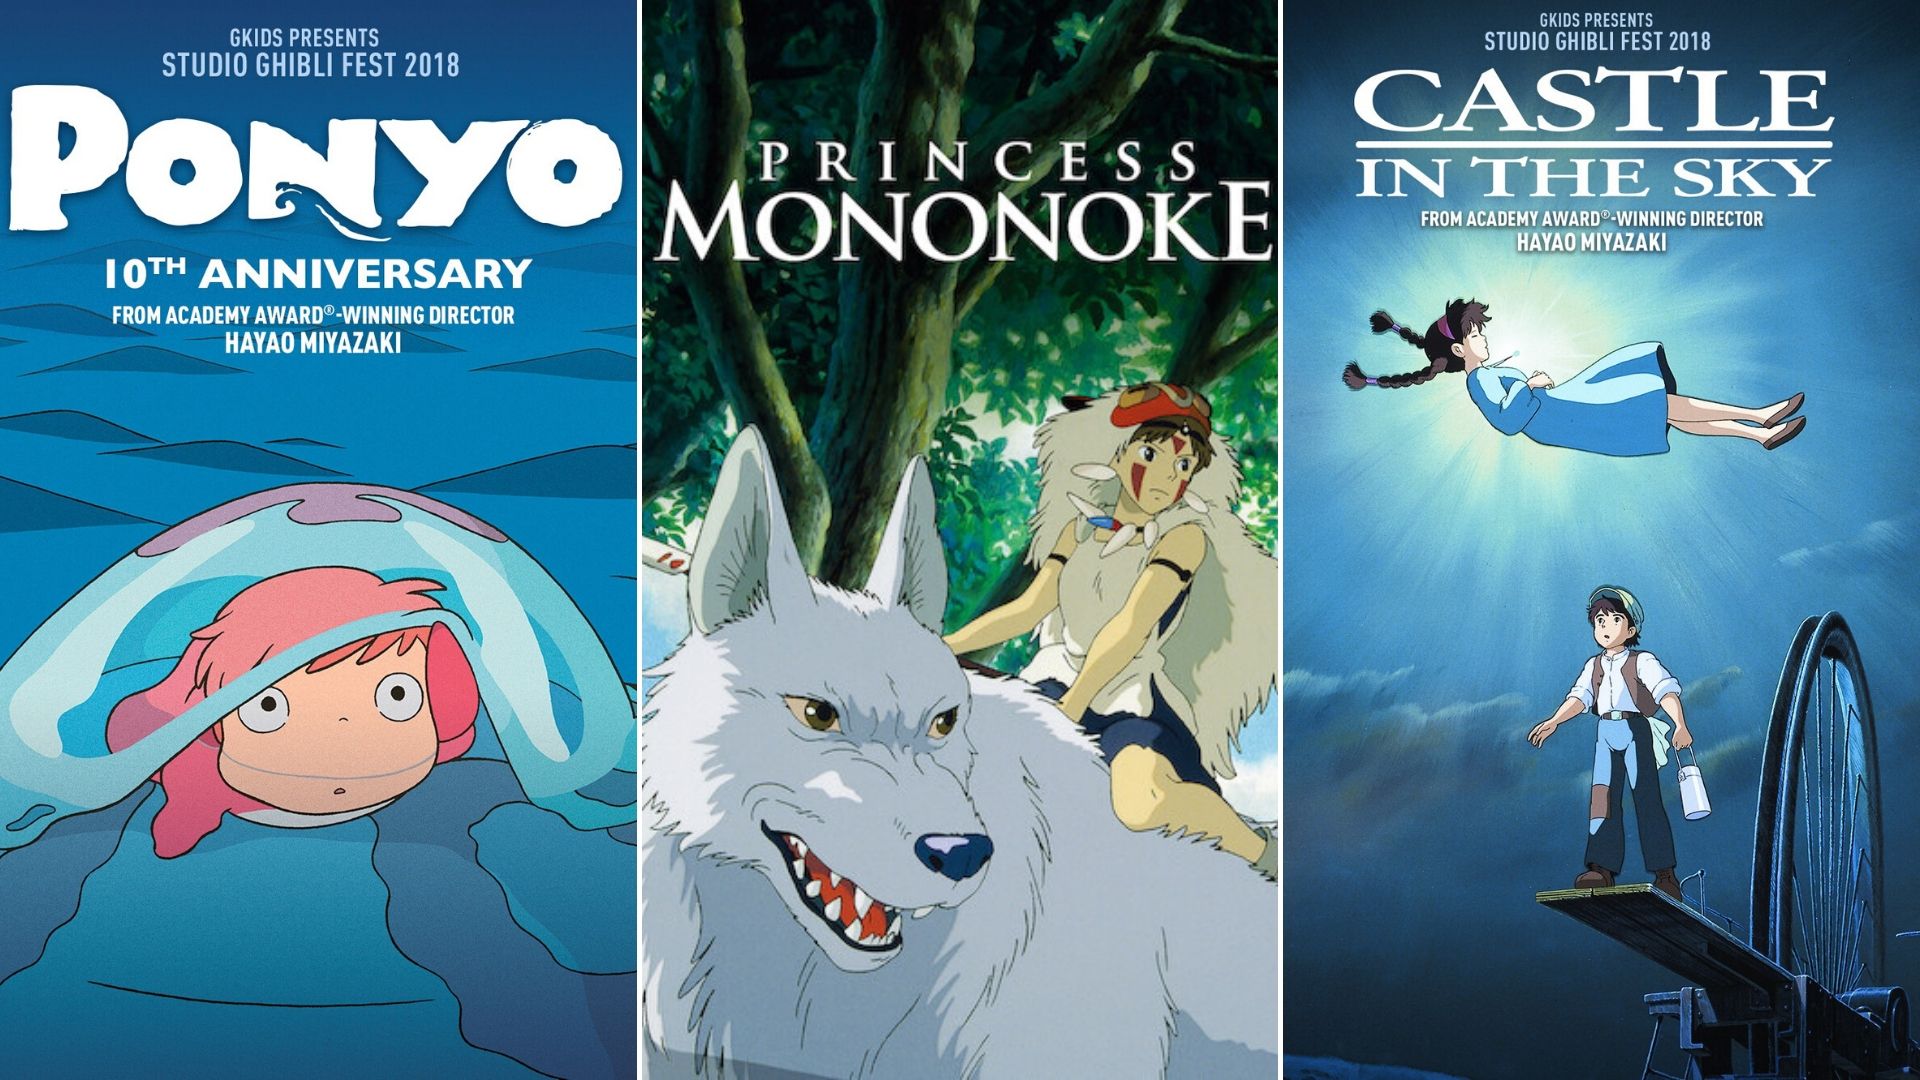 We’ve Ranked 10 Out Of The 21 Studio Ghibli Movies Available On Netflix